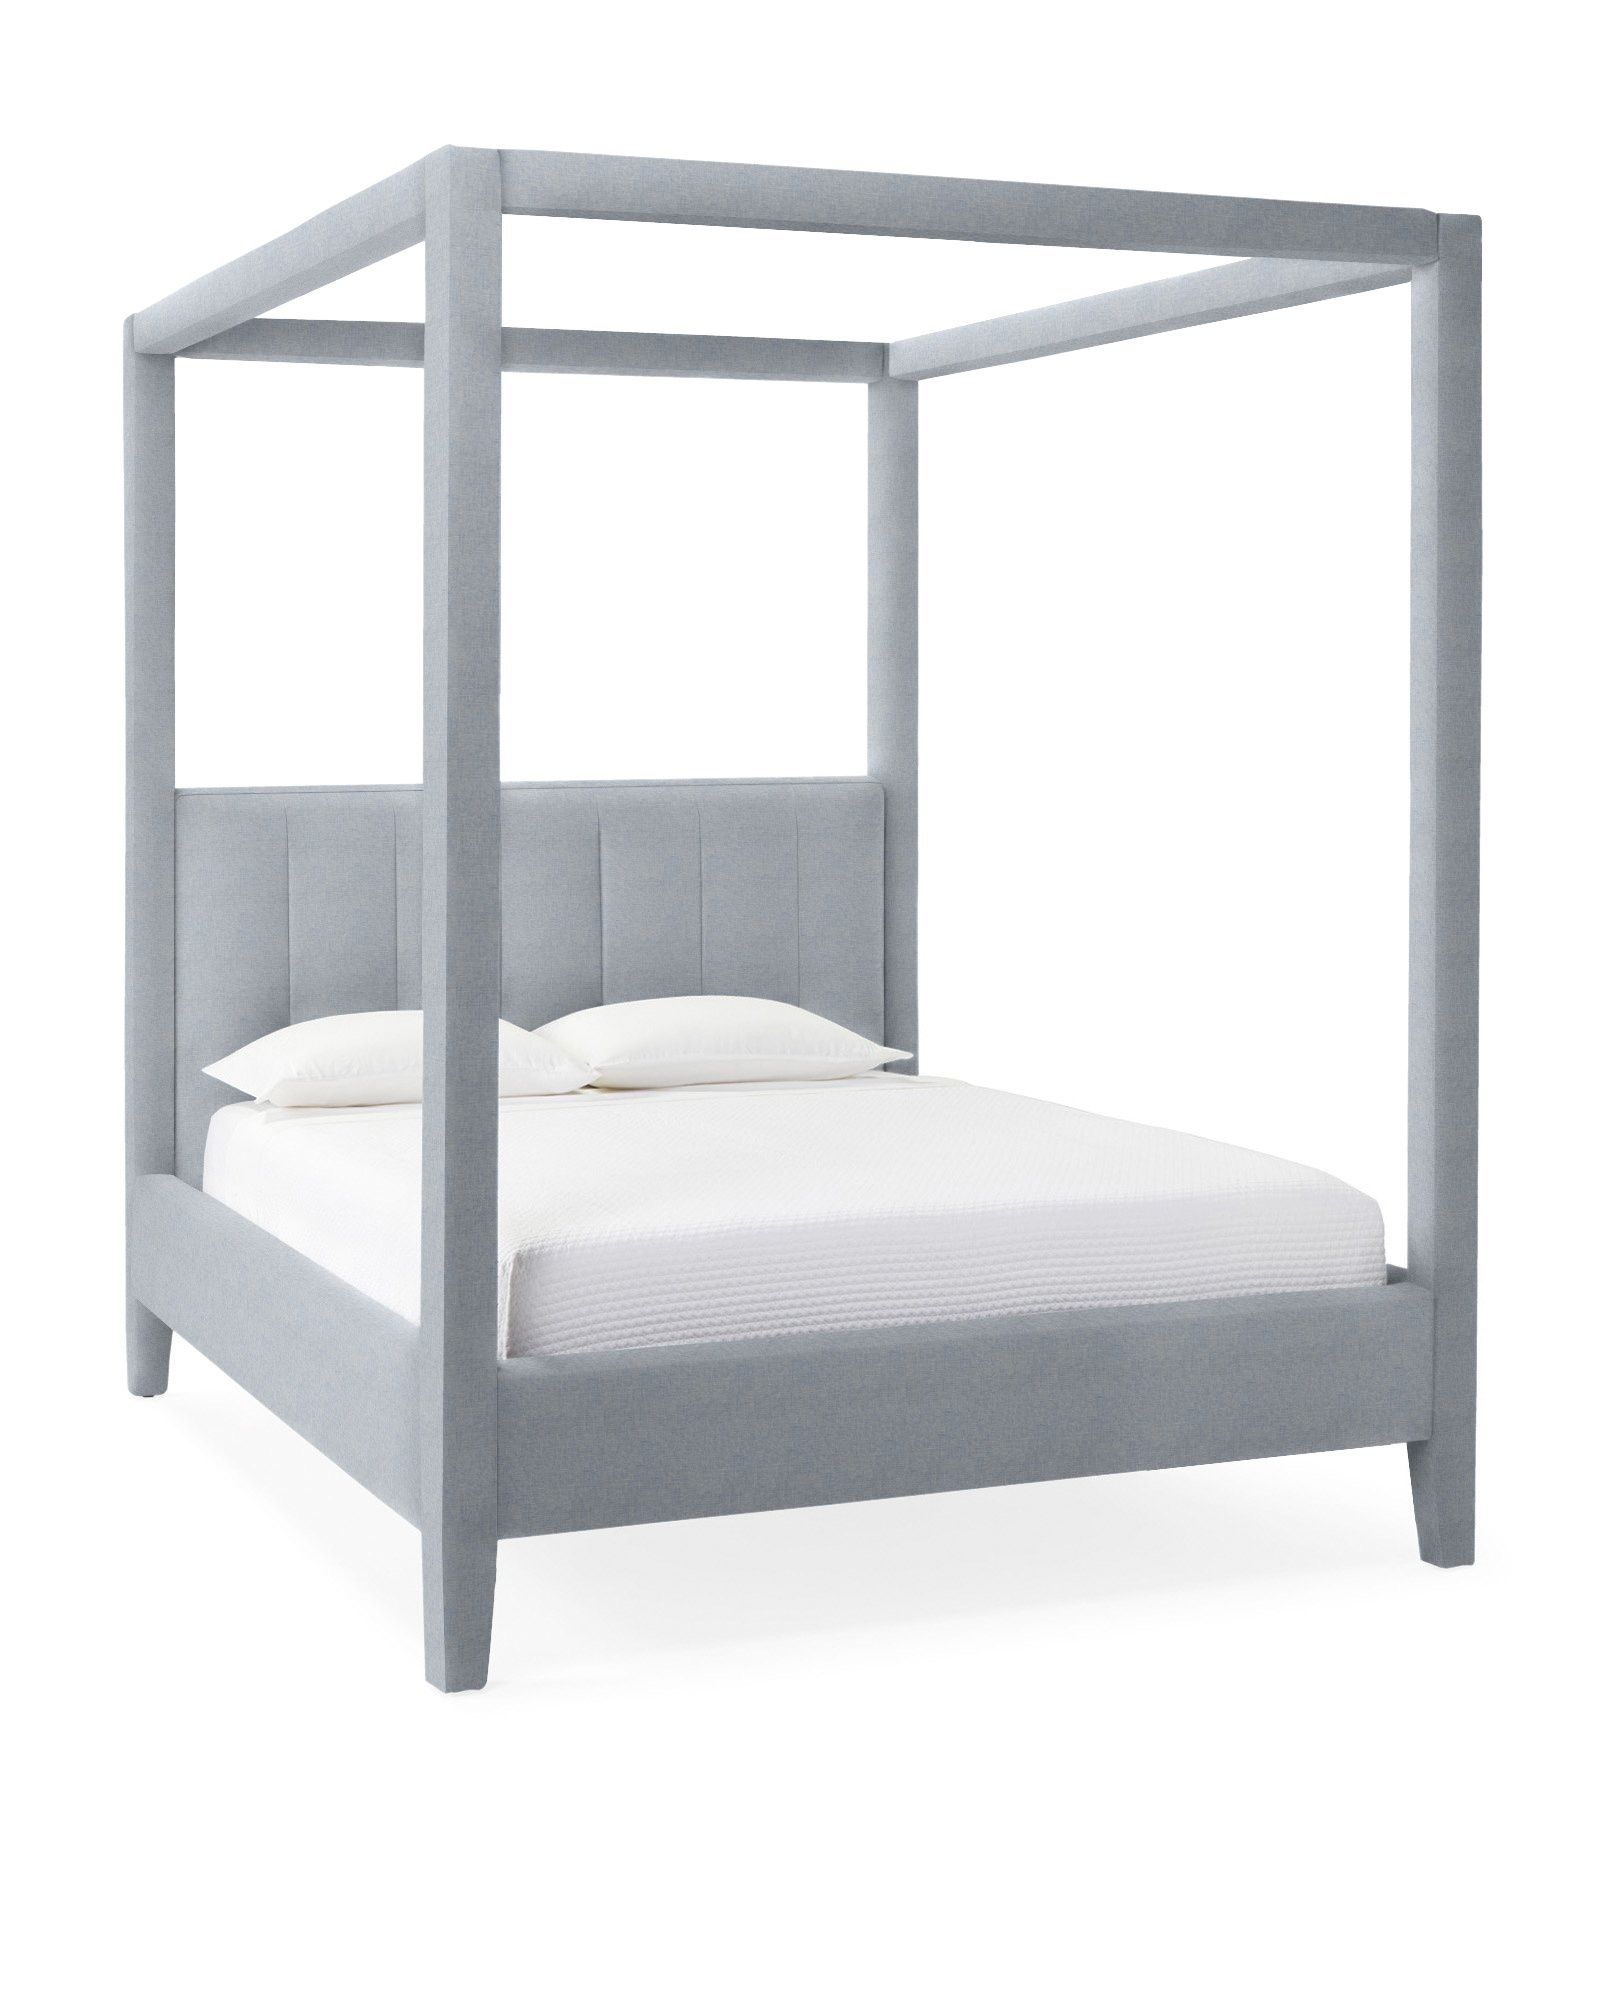 Franklin Four Poster Bed | Serena and Lily